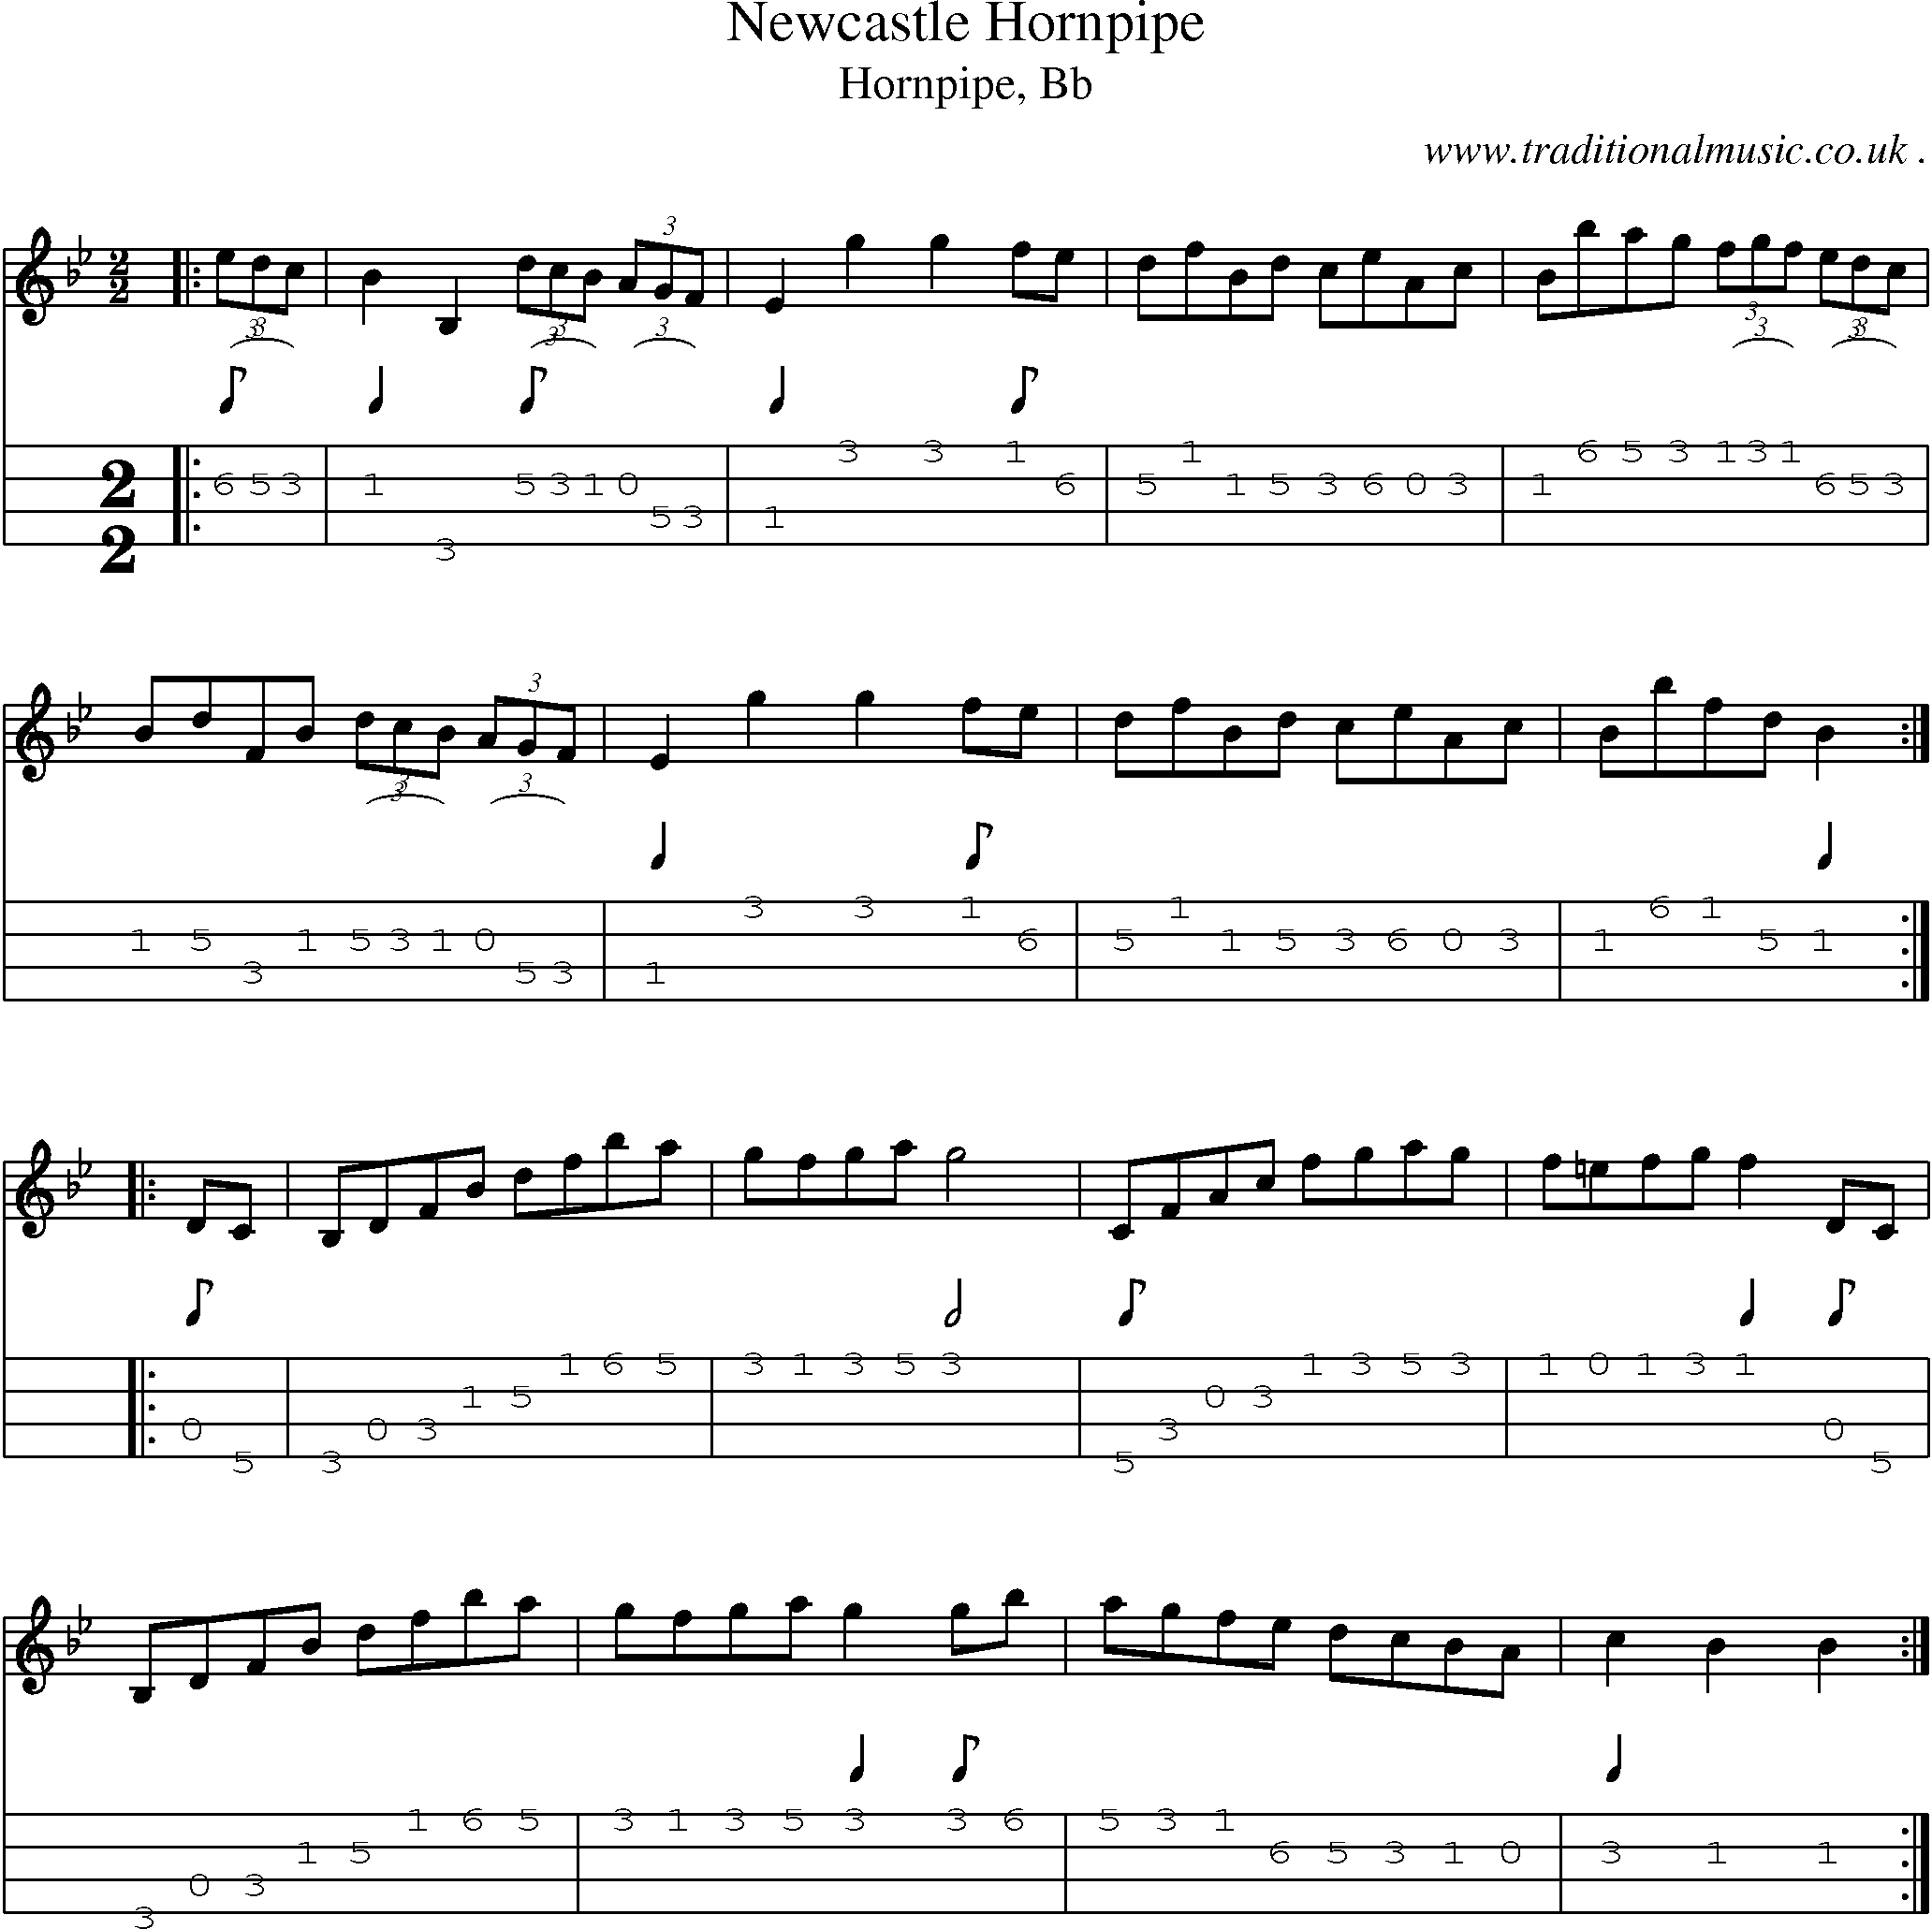 Sheet-music  score, Chords and Mandolin Tabs for Newcastle Hornpipe